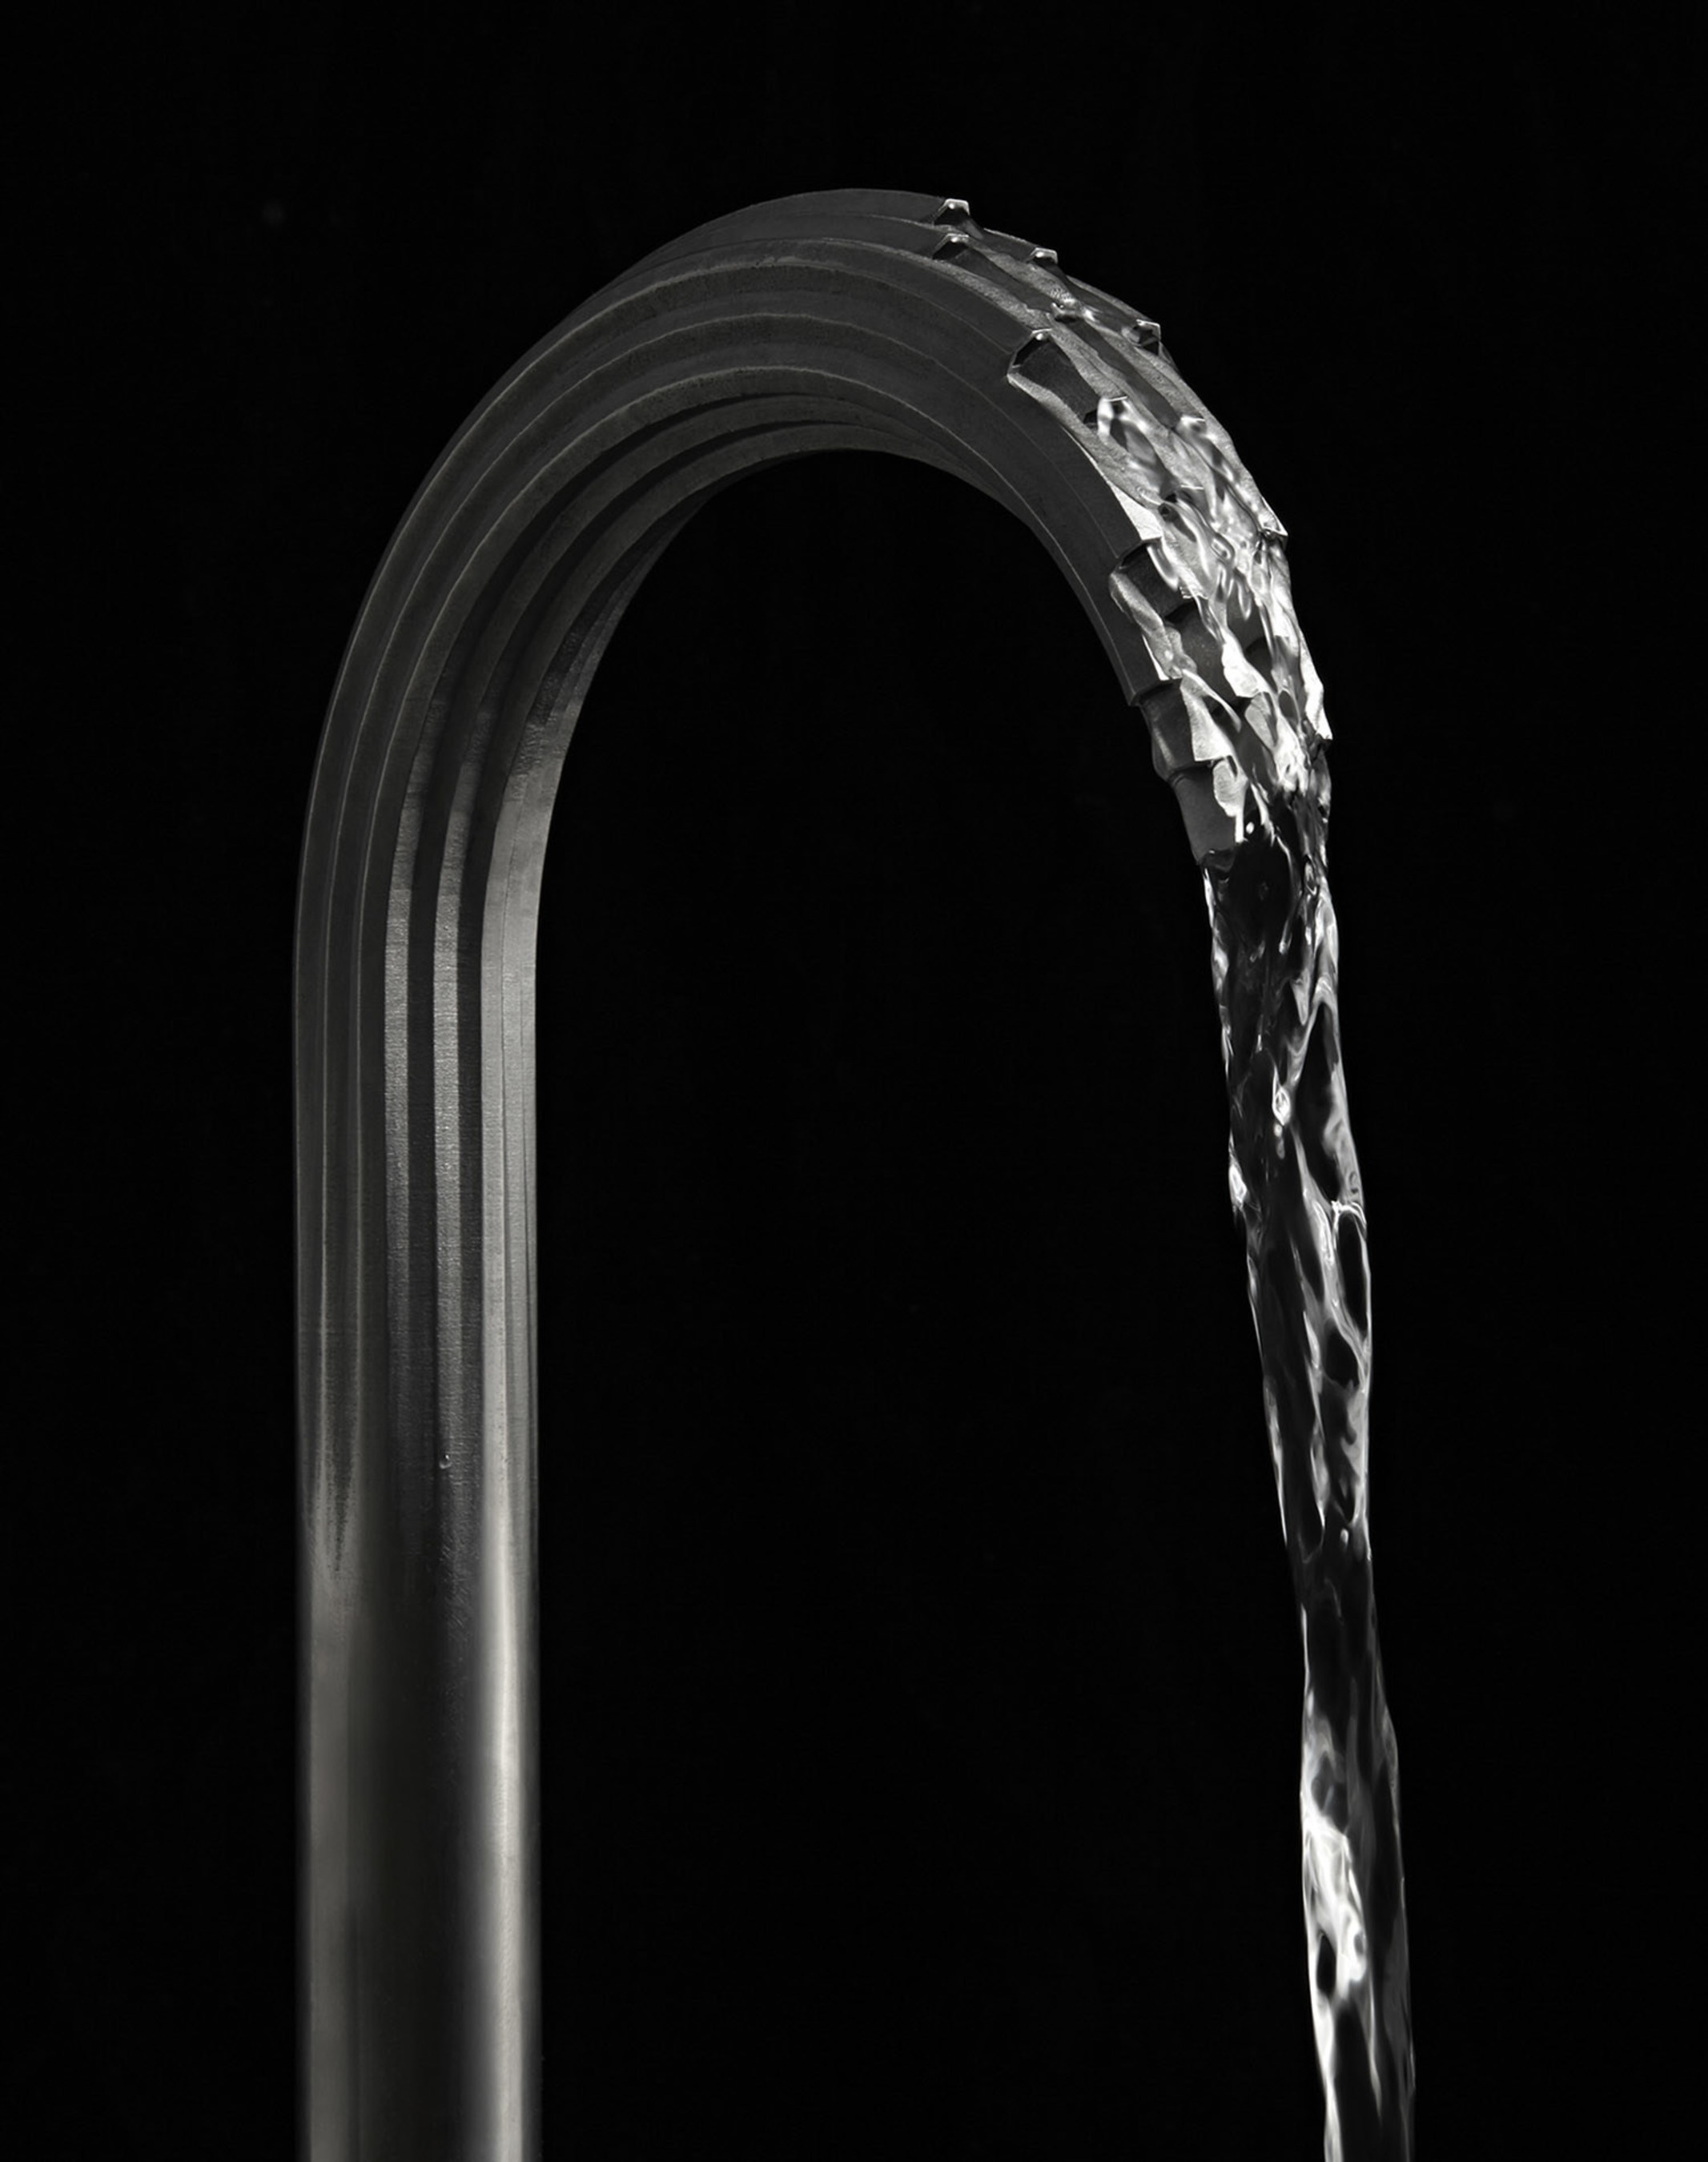 The Shadowbrook 3D printed metal faucet was recognized with a Platinum A' Design Award in the 3D Printed Forms and Products category, receiving the highest score in this group. This innovative faucet is available exclusively from DXV by American Standard.